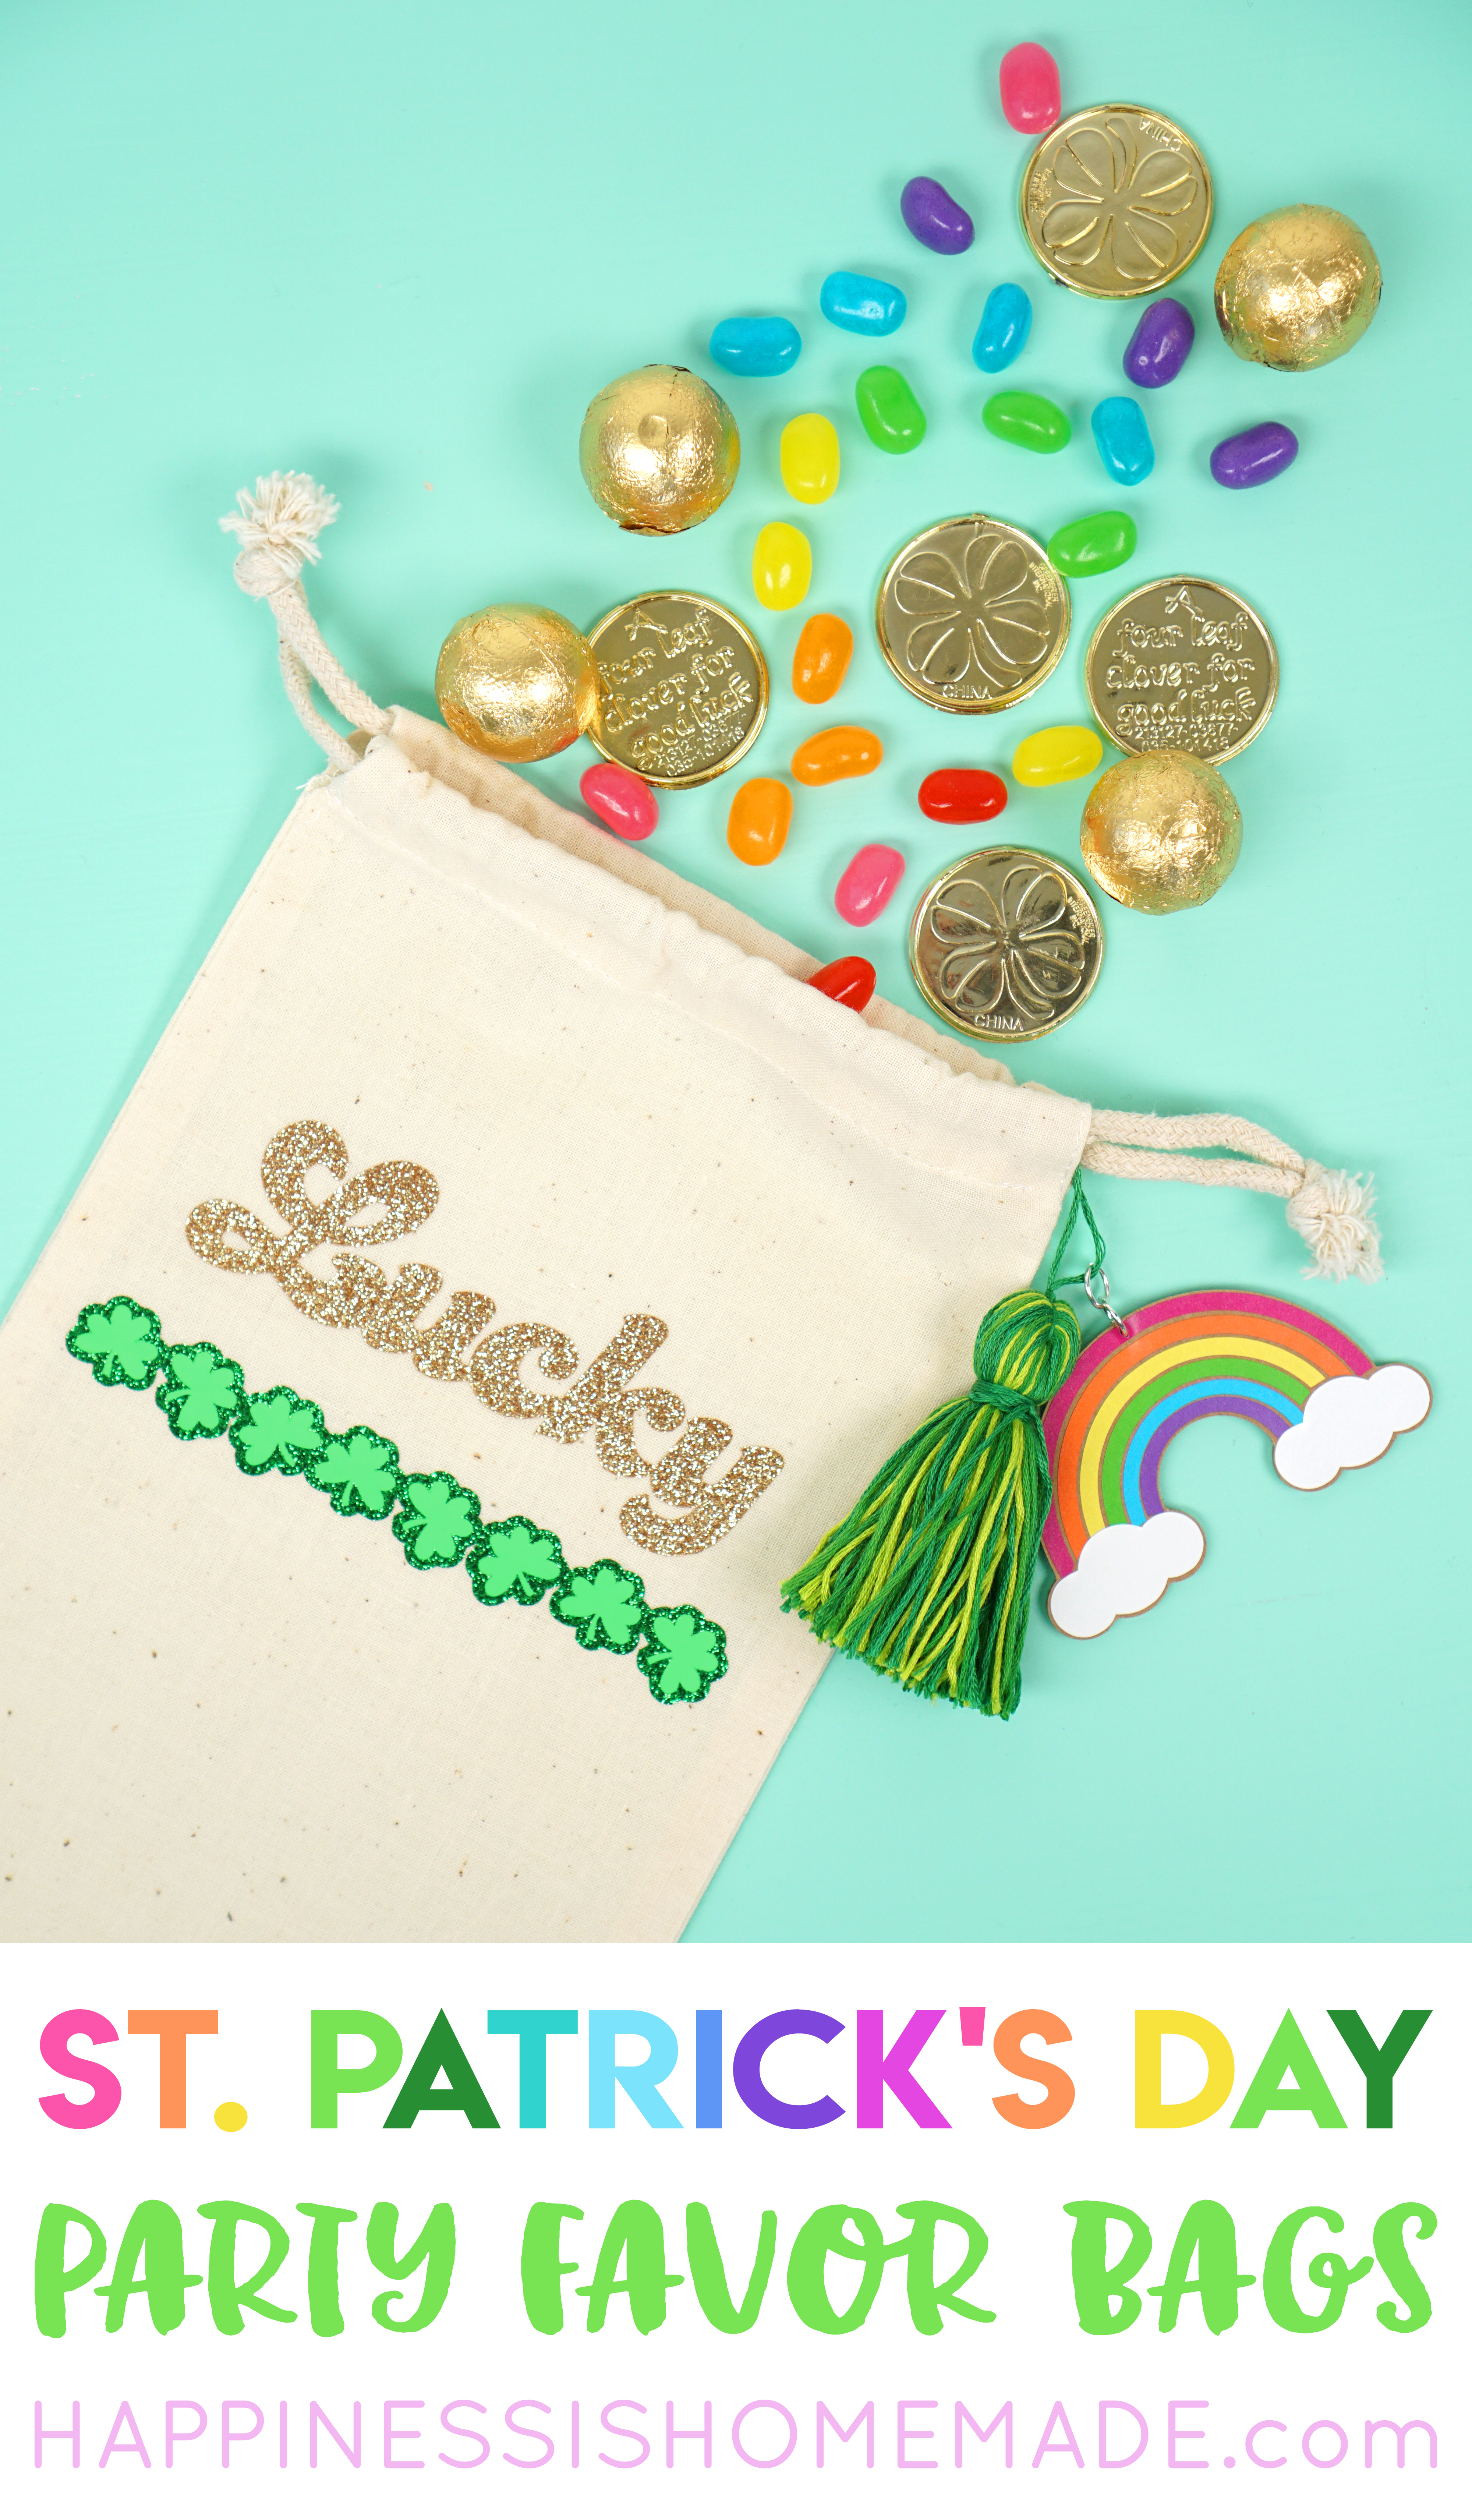 treat bag for st patricks day with gold coins and candies